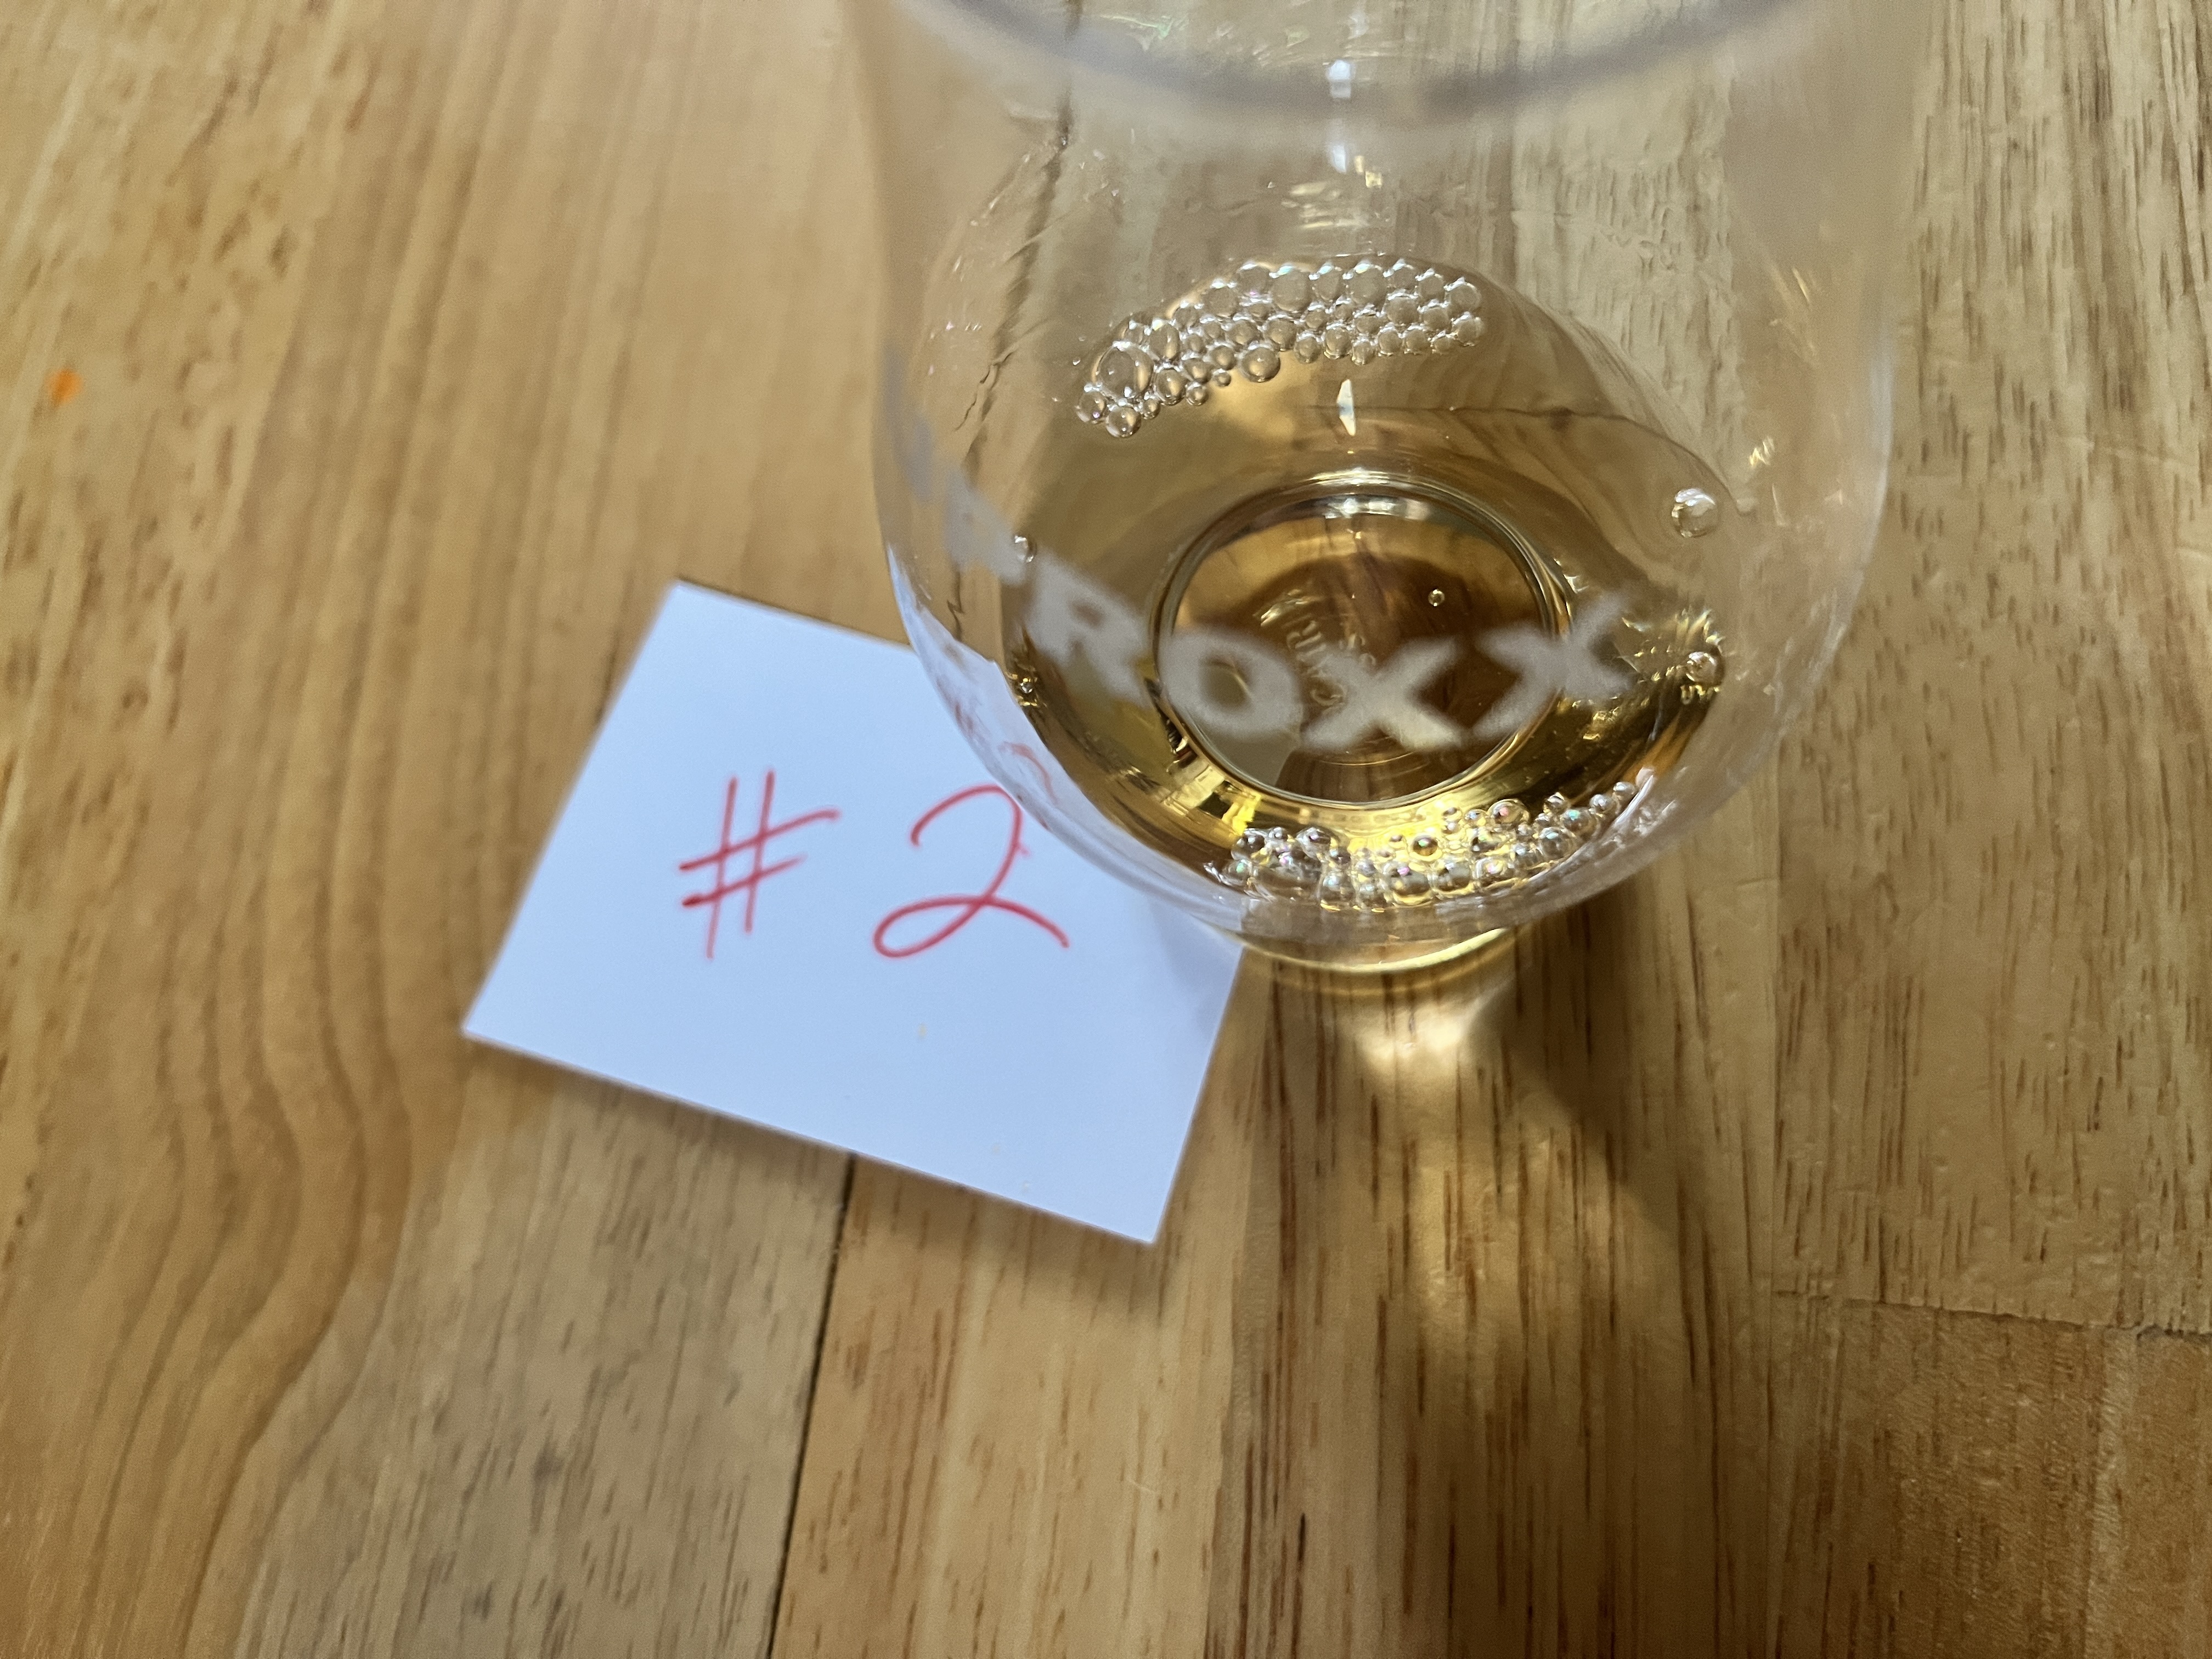 Peated Scotch Whisky ReviewedPeated Scotch Whisky Reviewed